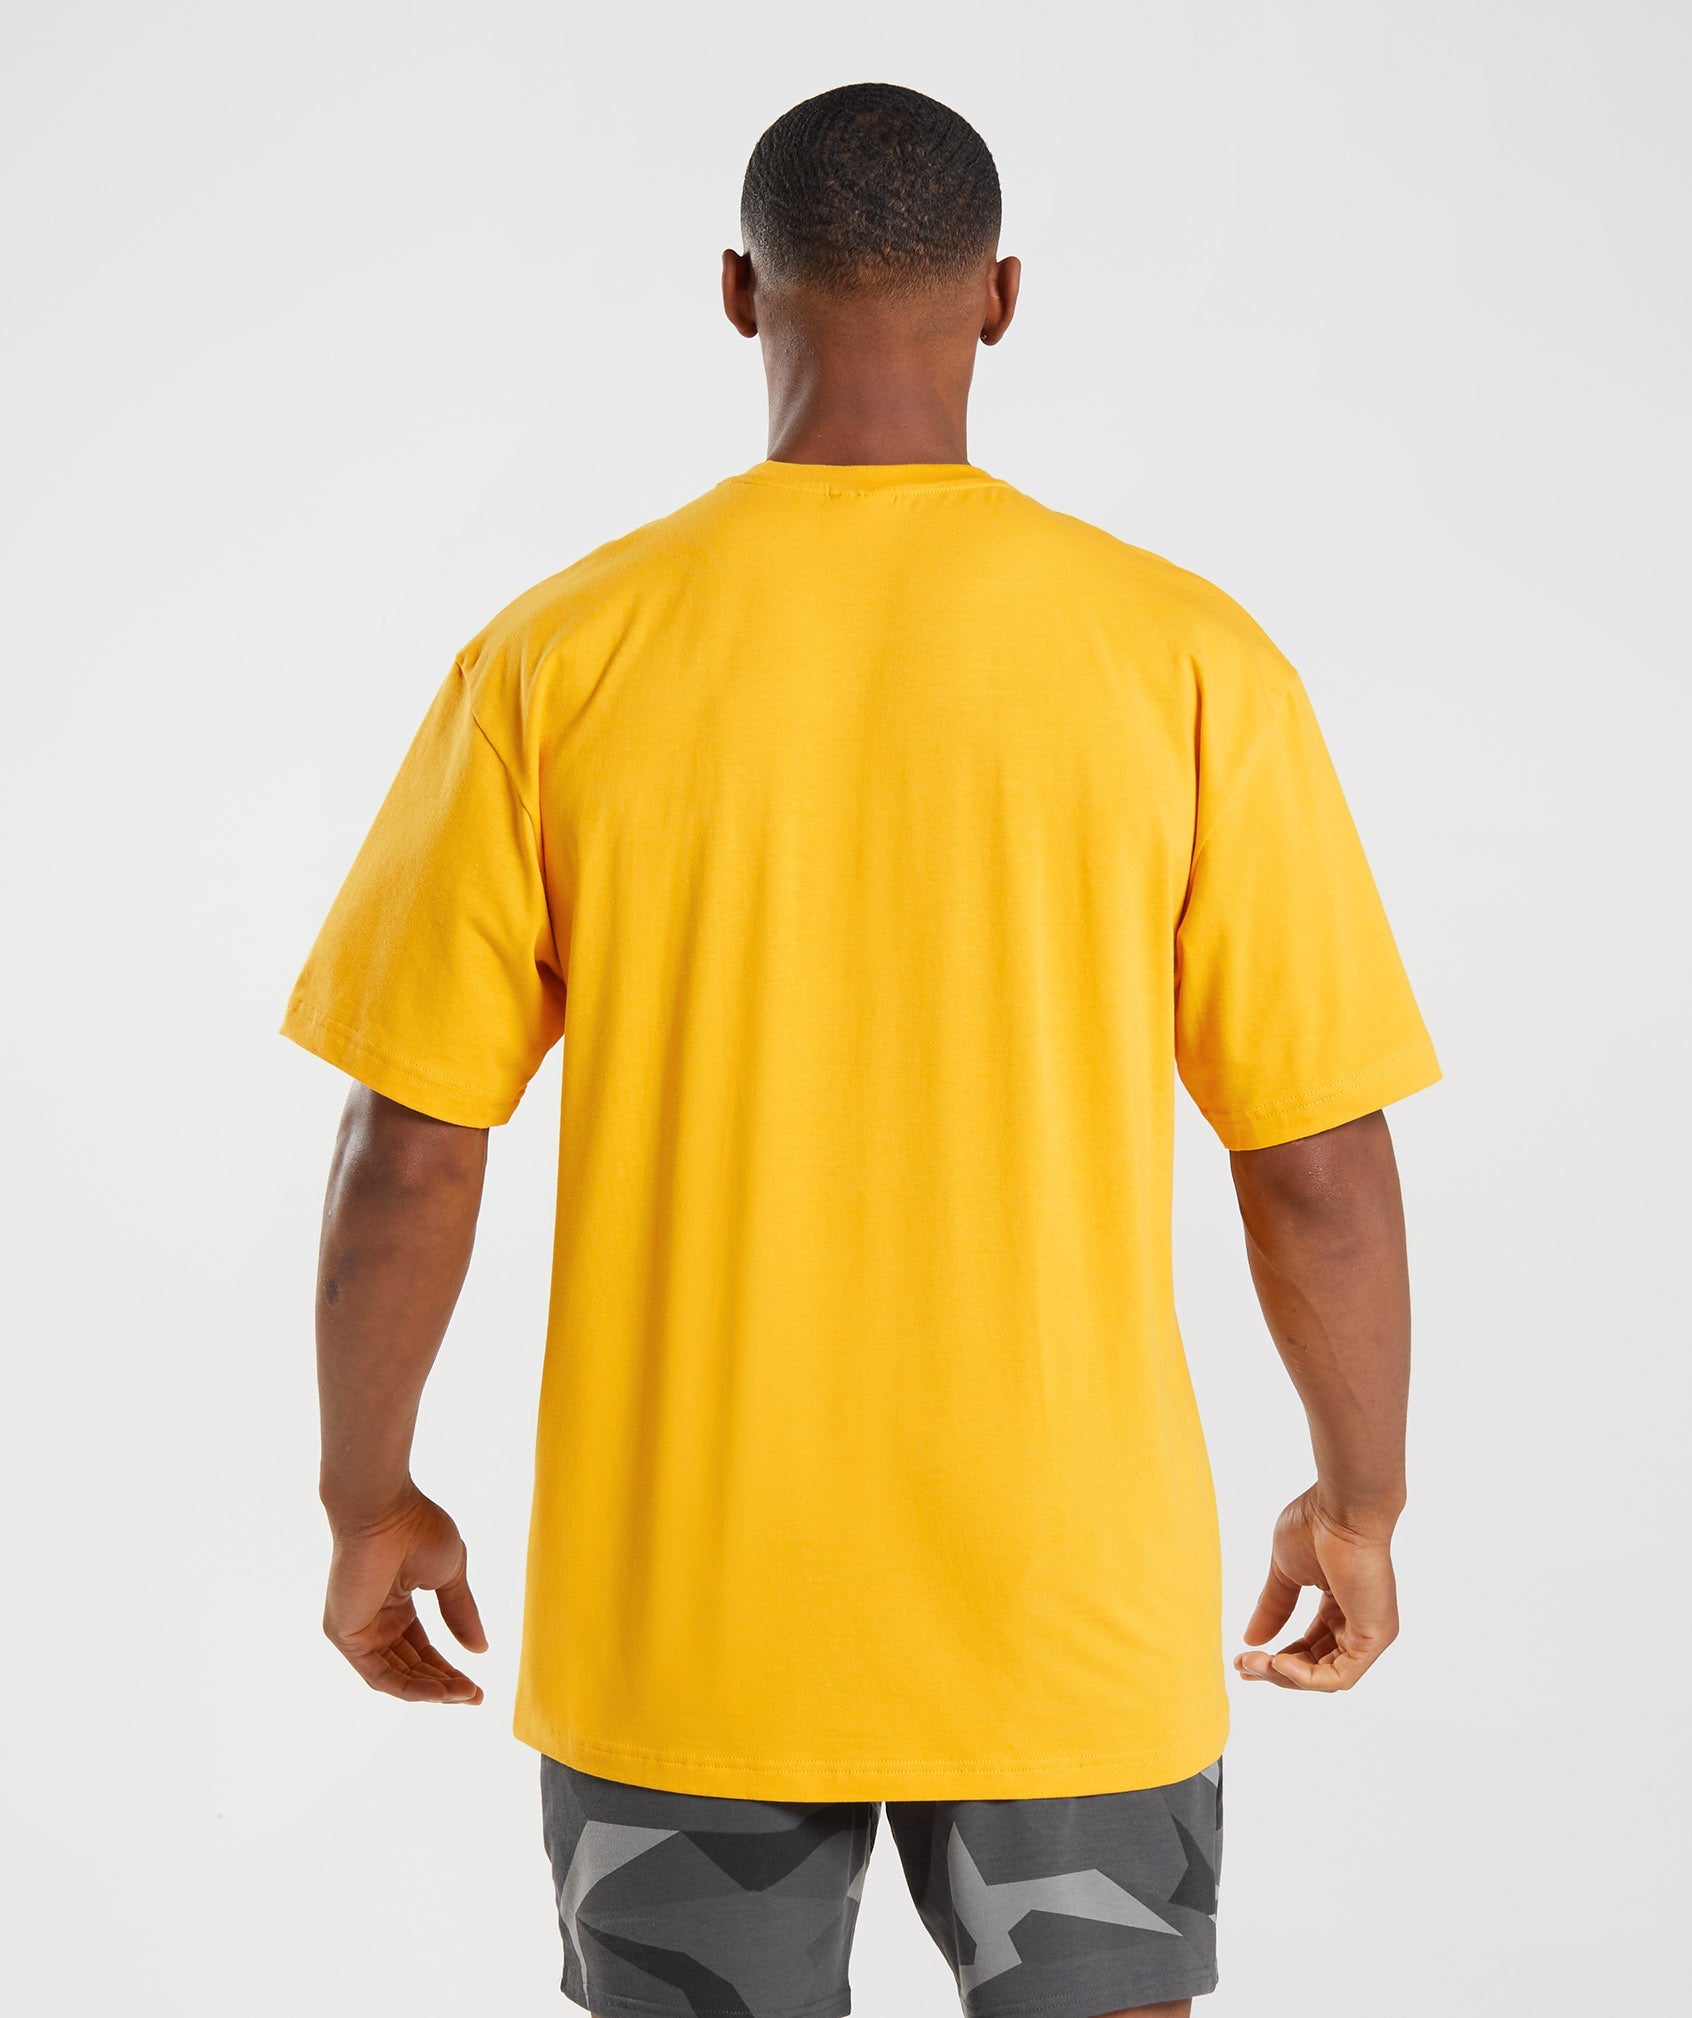 Apollo Infill Oversized T-Shirt in Saffron Yellow - view 2